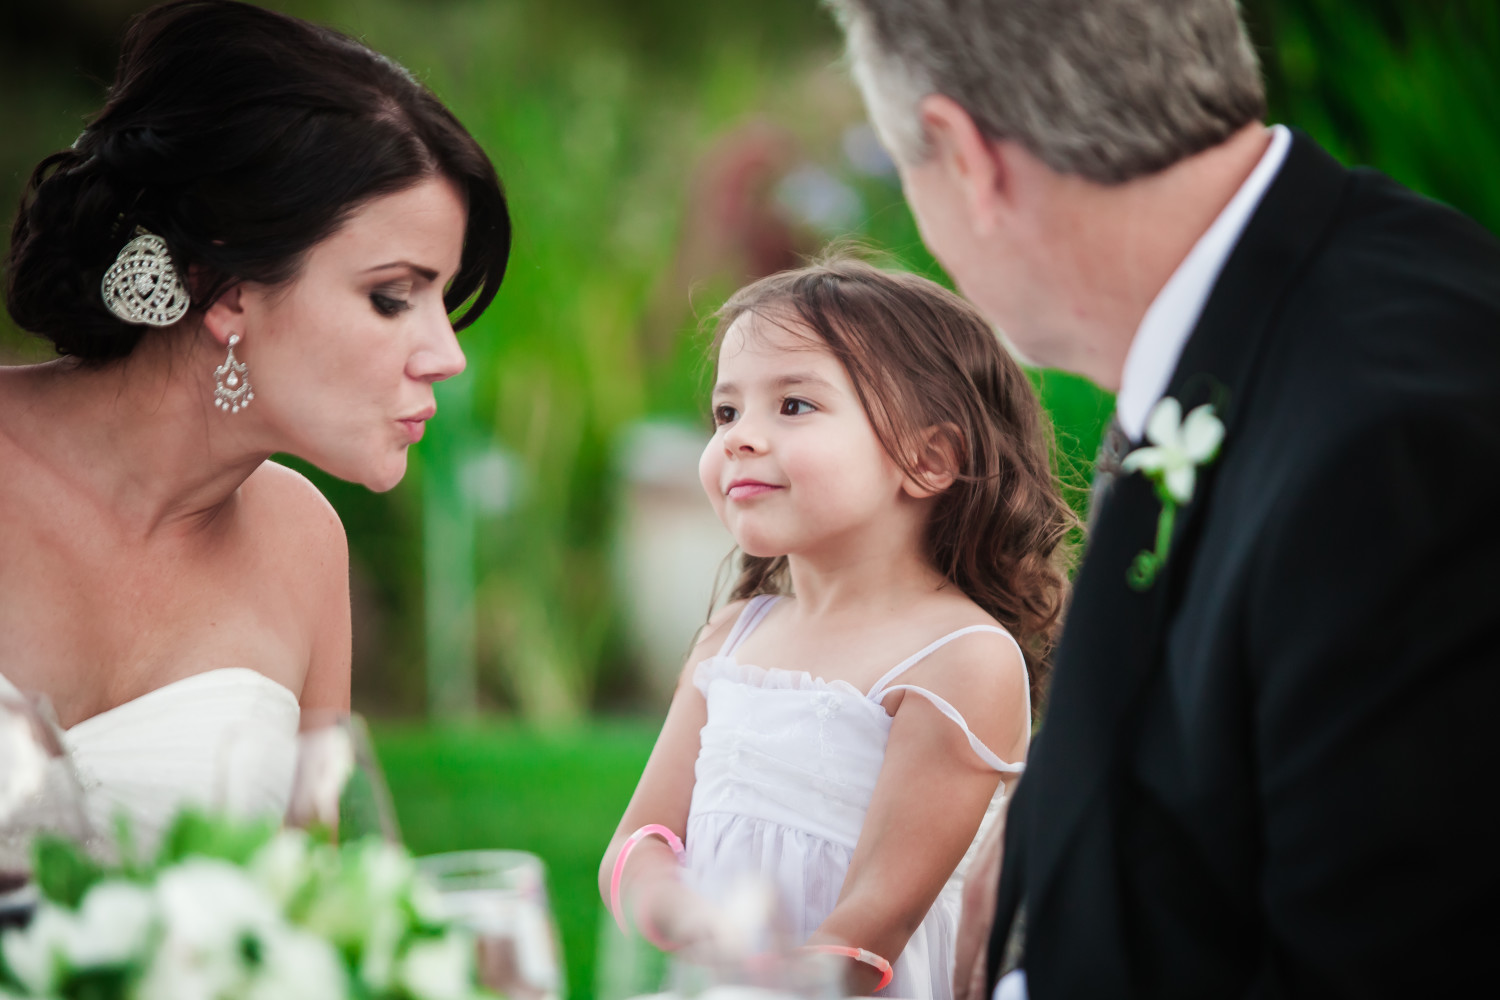 Bride and a young guest